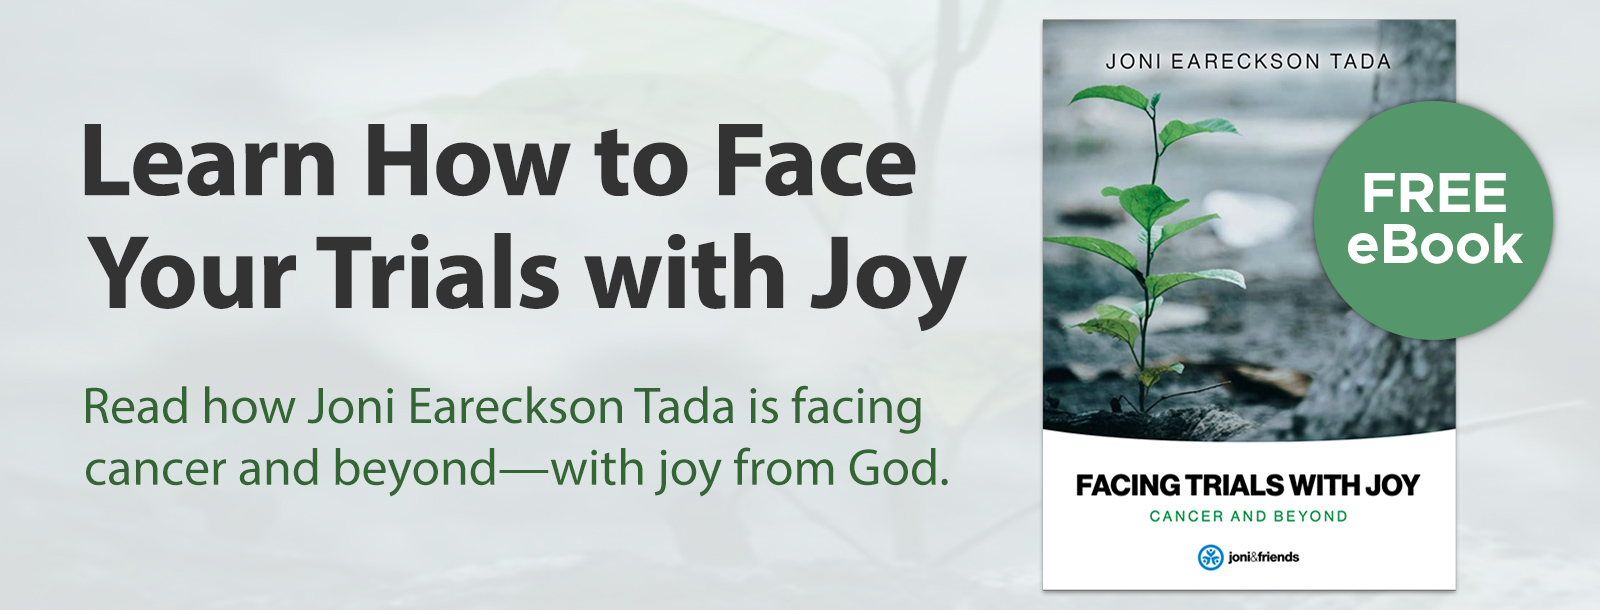 Learn How to Face Your Trials with Joy - Read how Joni Eareckson Tada is facing cancer and beyond-with joy from God.